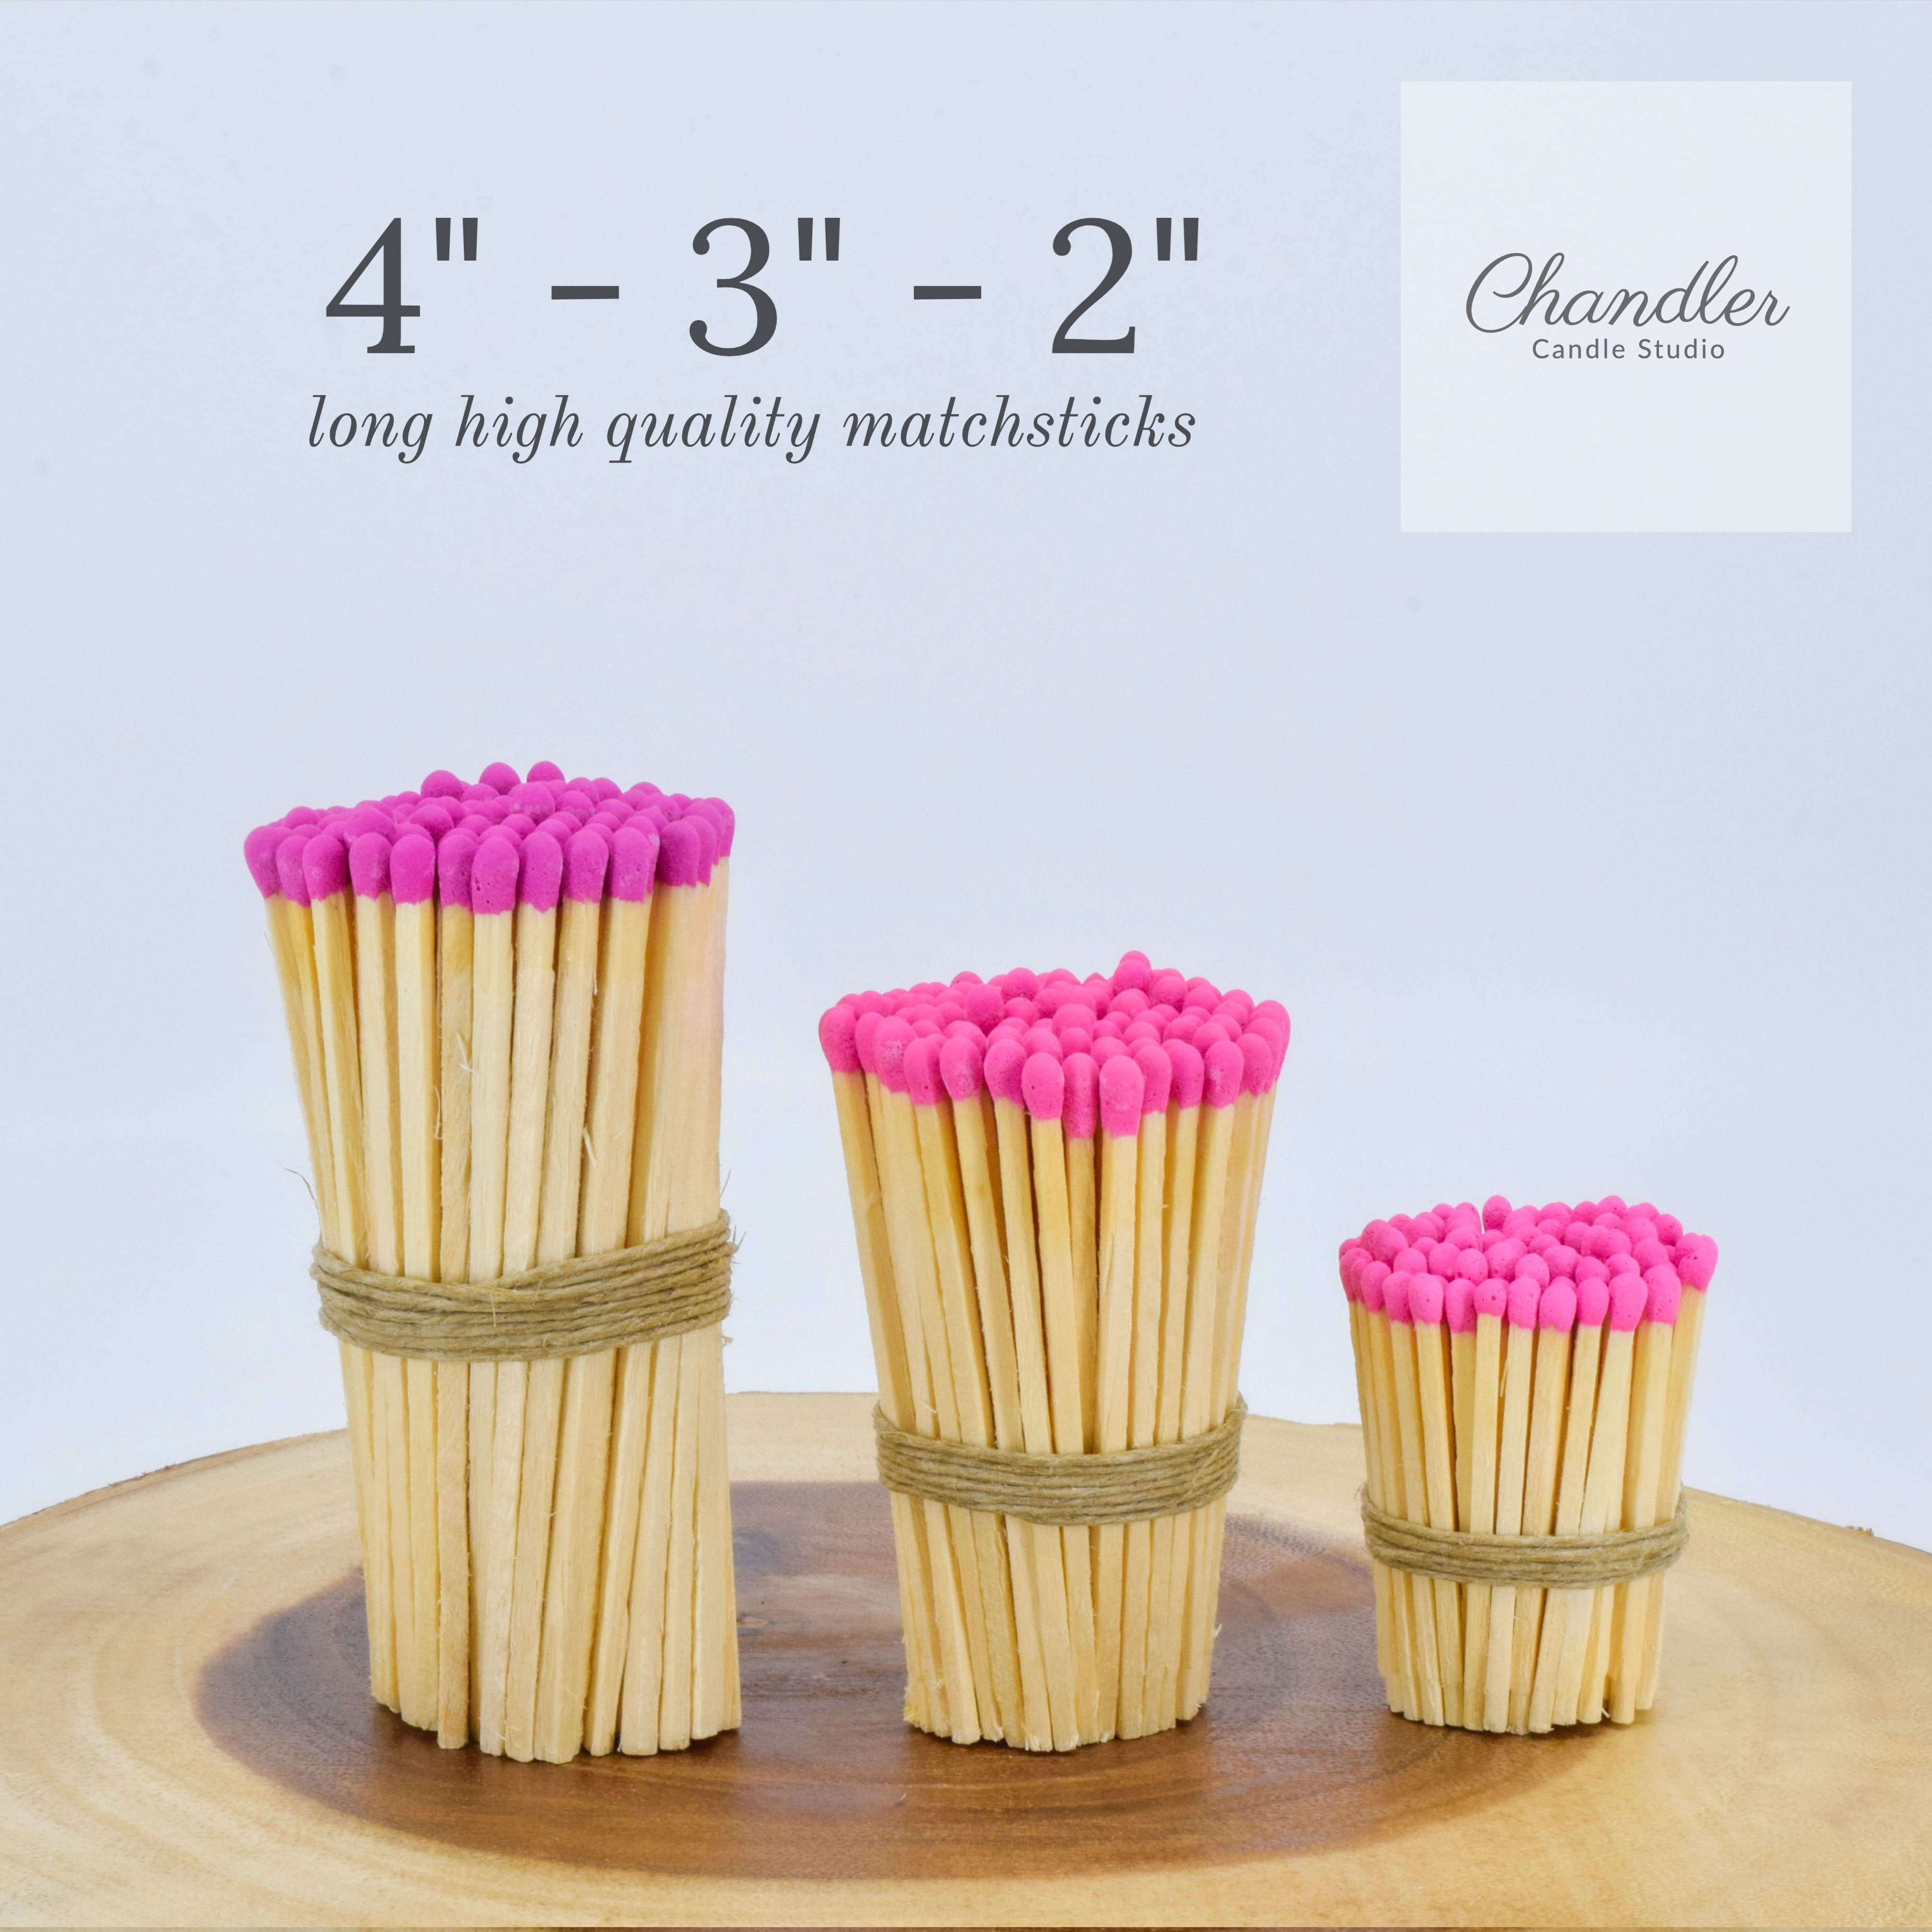 2 Light Pink Tip Safety Matches | Set of 100+ Bulk Artisan Matchsticks with Striker Stickers by Thankful Greetings | Decorative & Unique Candle